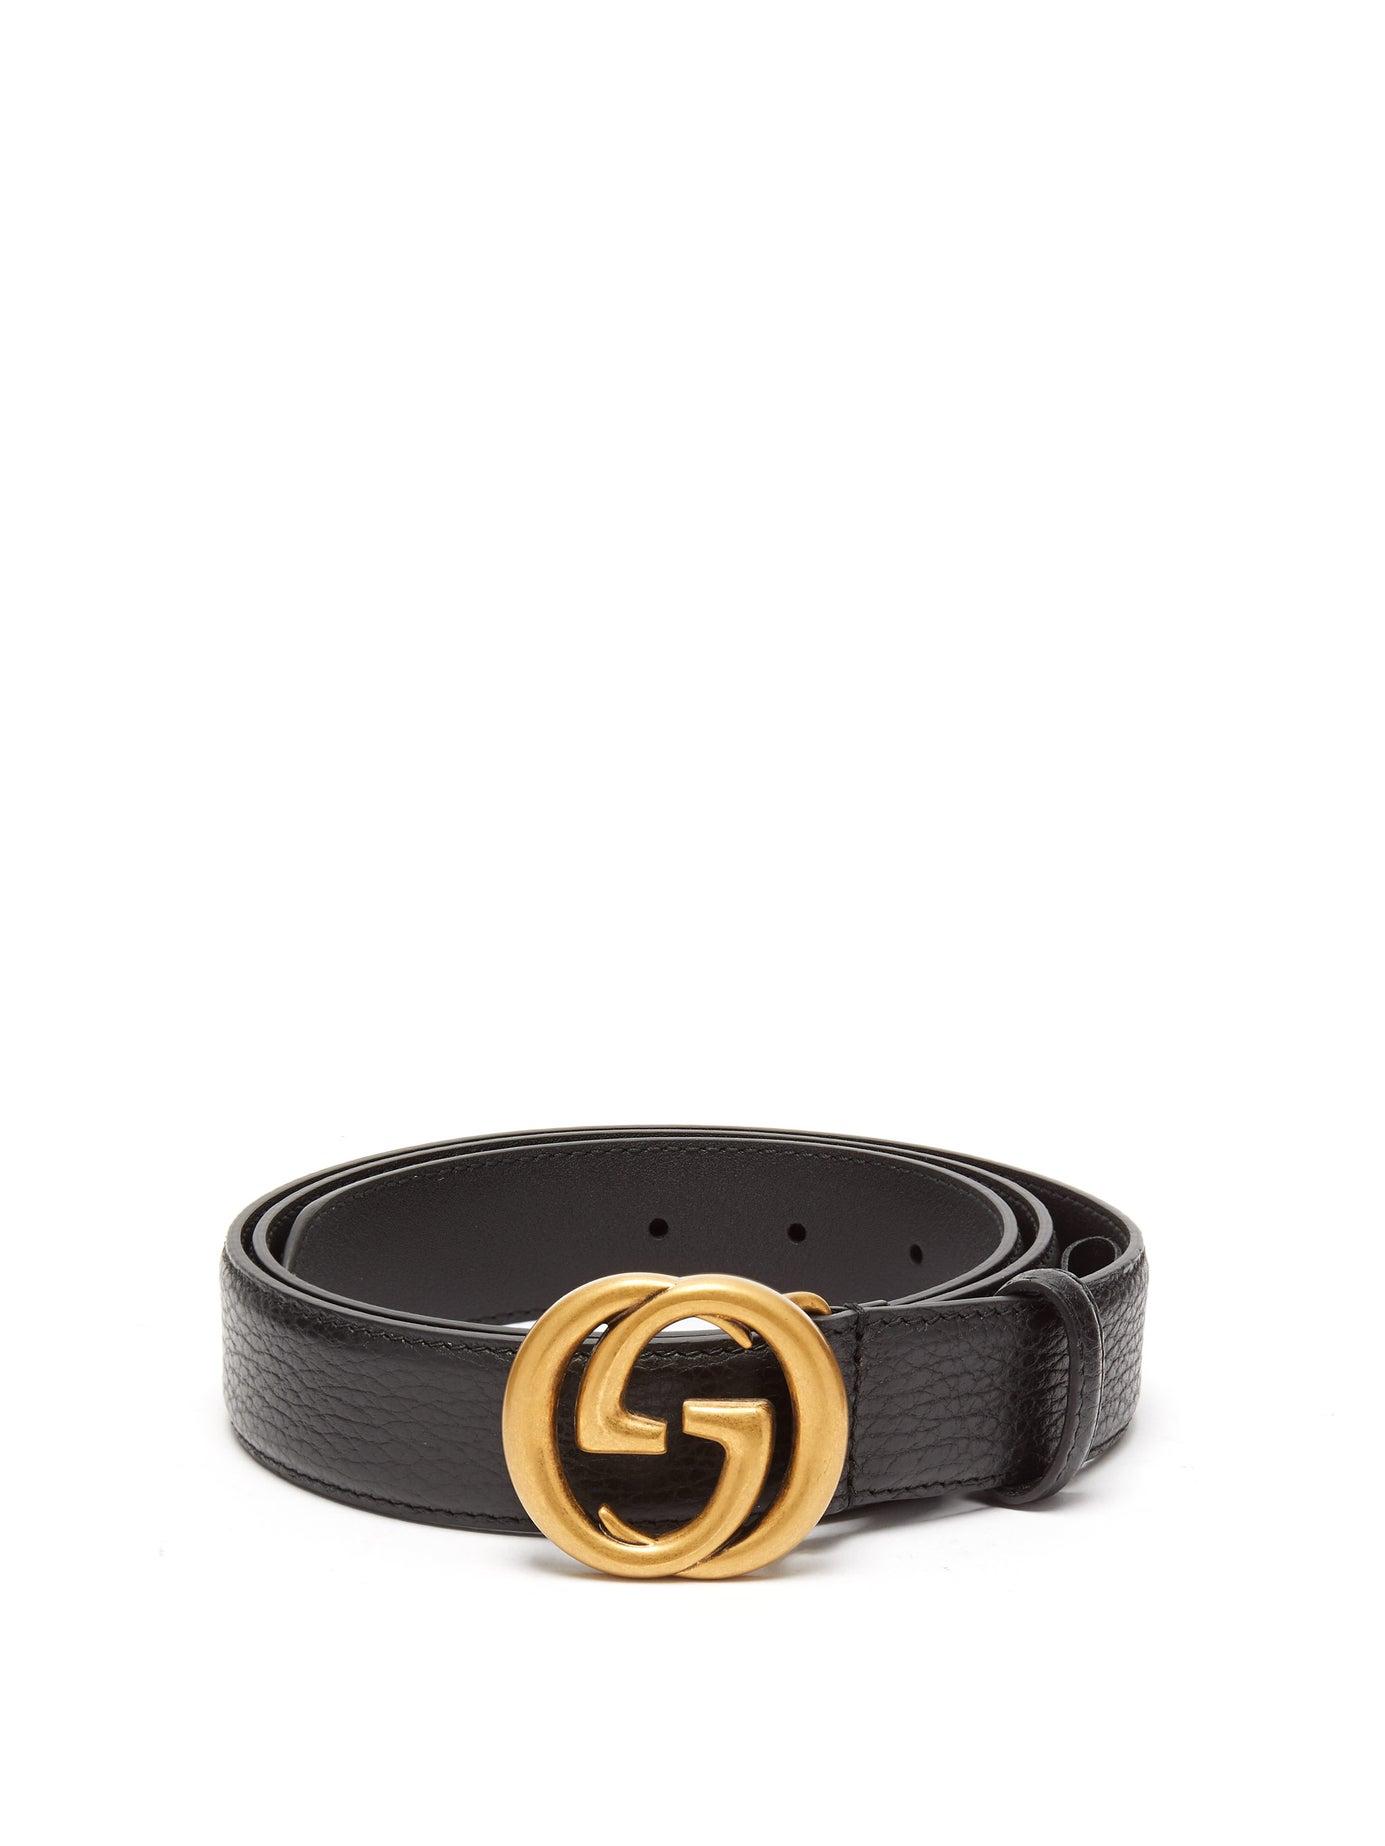 Gucci Gg Grained-leather Black Belt for Men - Lyst